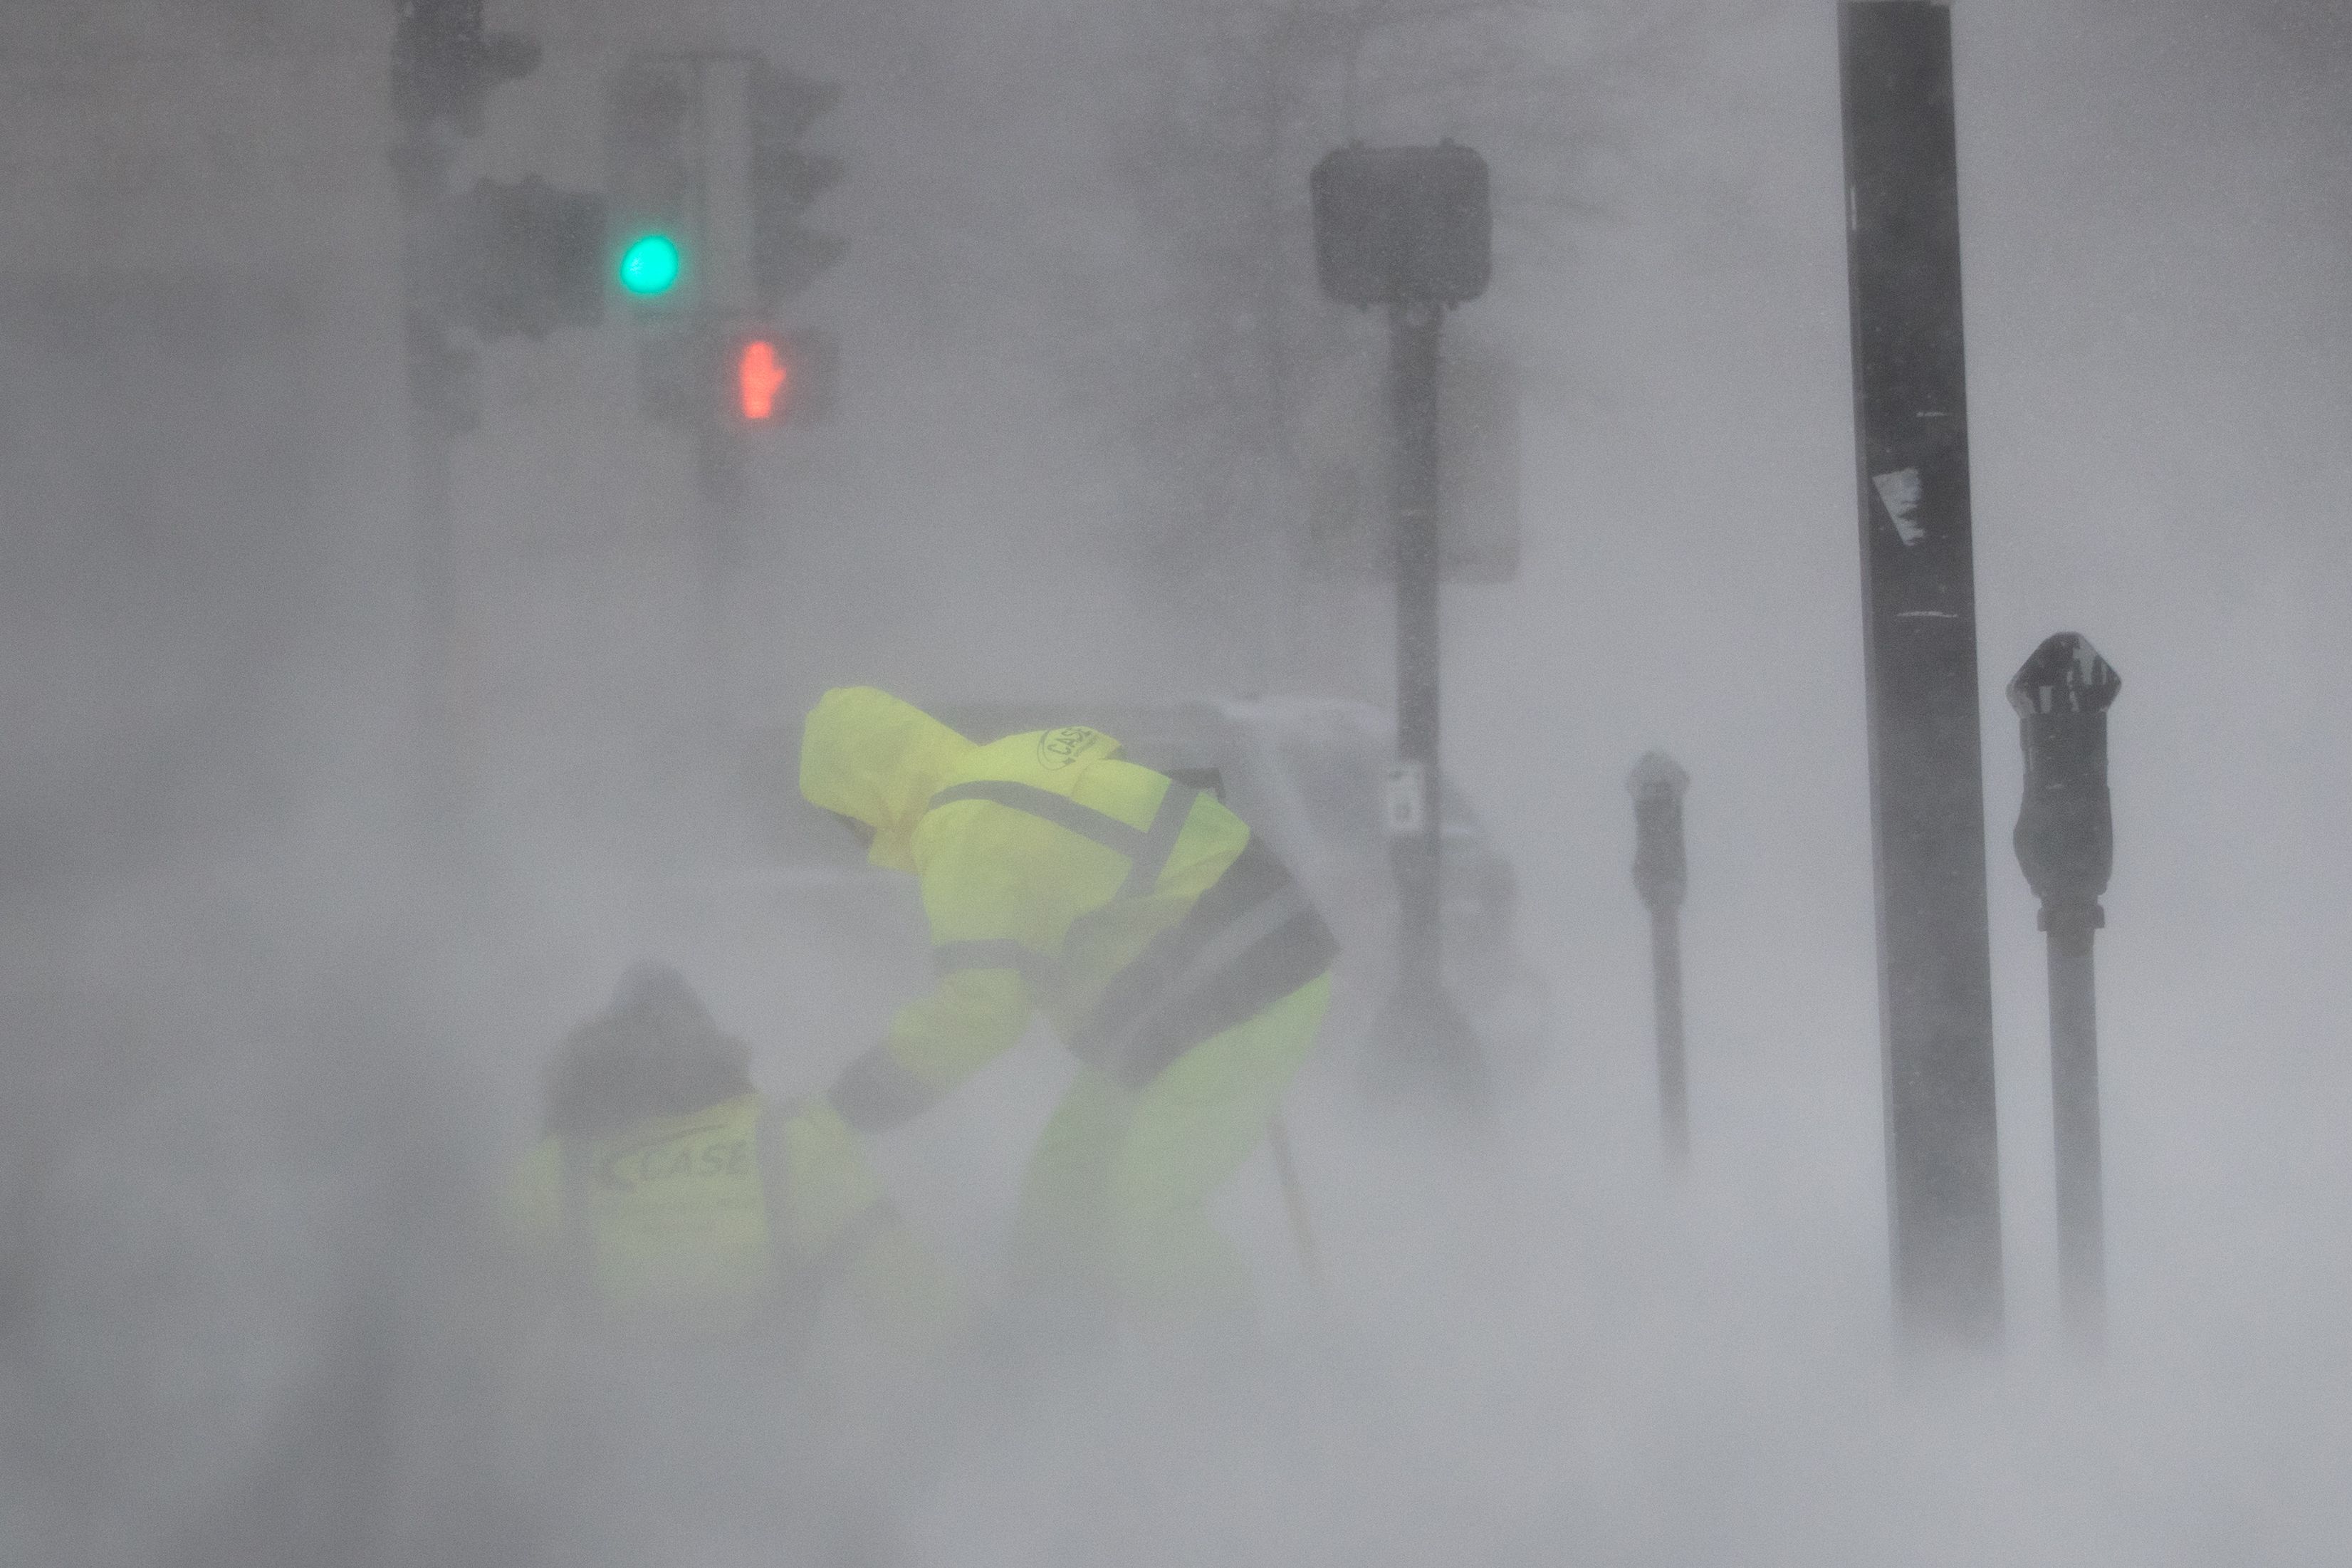 A worker helps another who was blown down by wind as Winter Storm Kenan bears down on January 29, 2022 in Boston, Massachusetts.